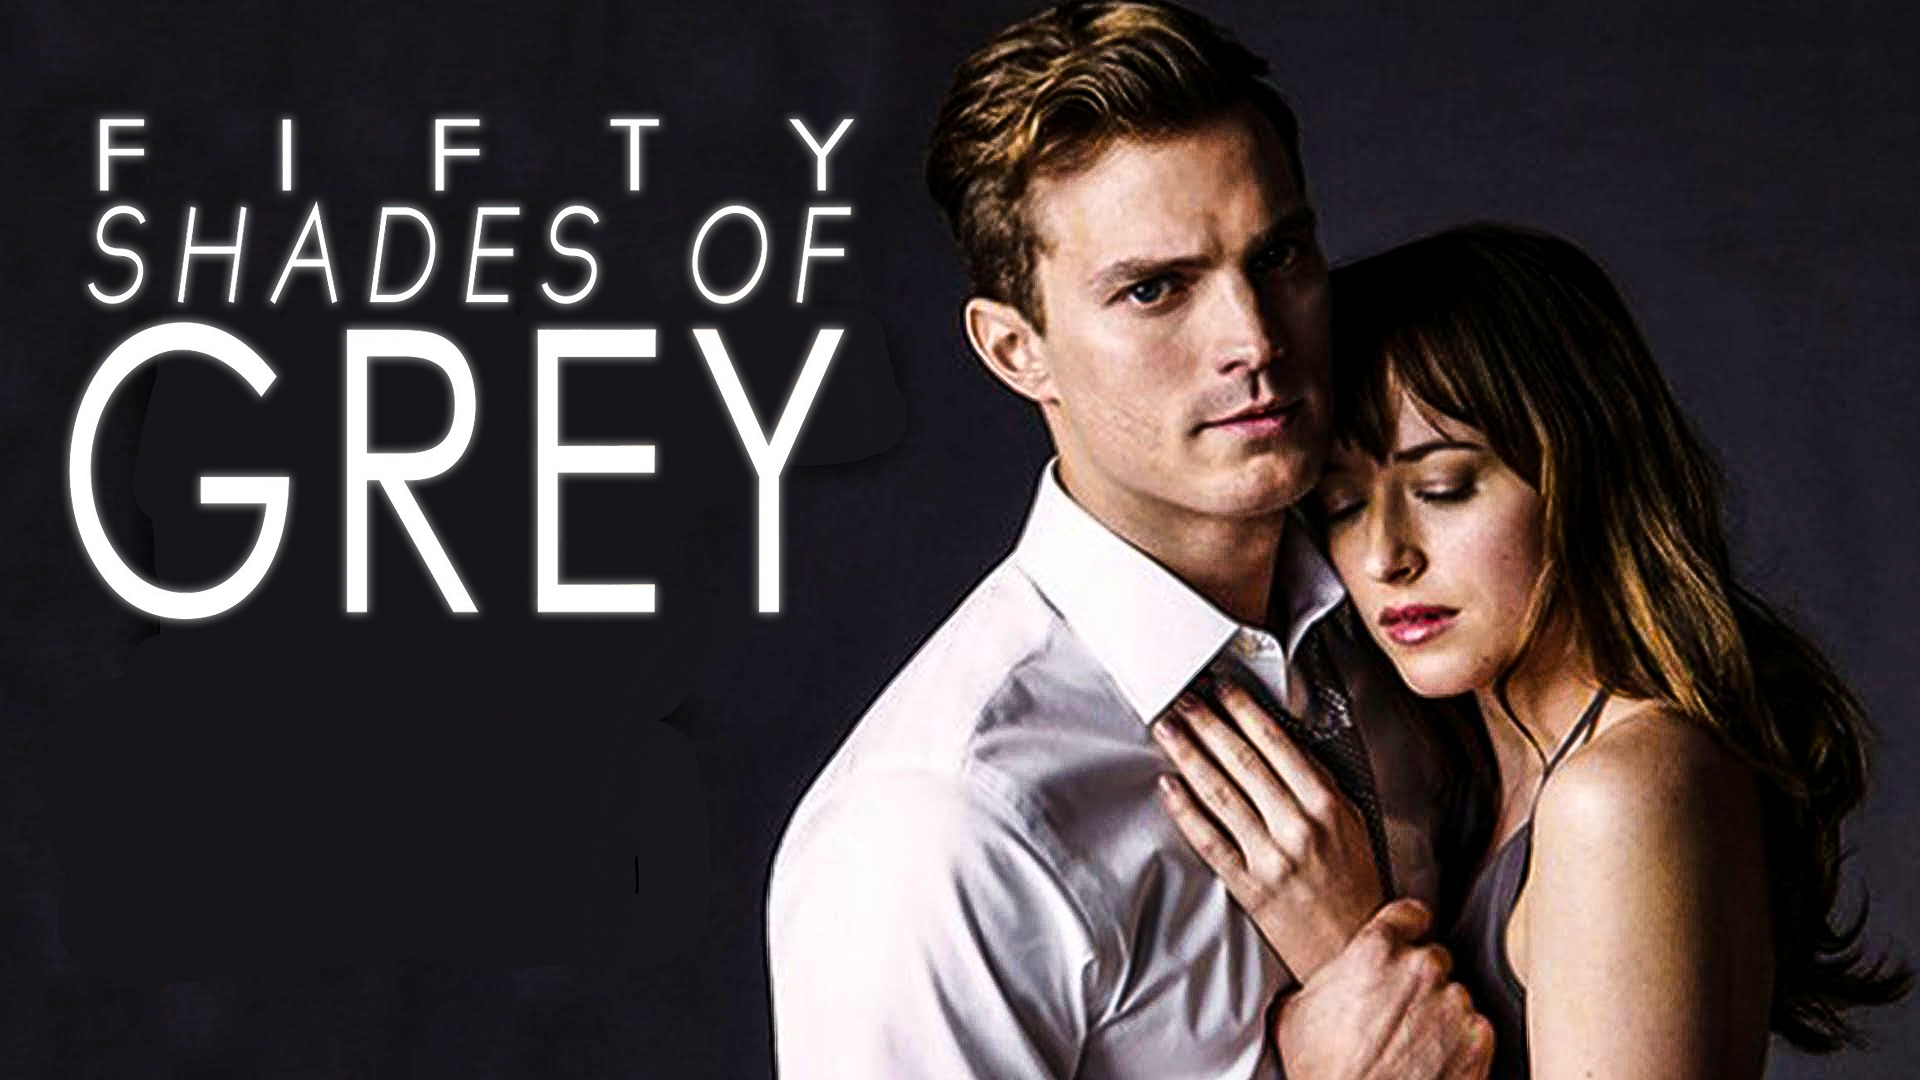 50 Shades Of Grey Live Chat Gets An Online Twitter Spanking - B&T